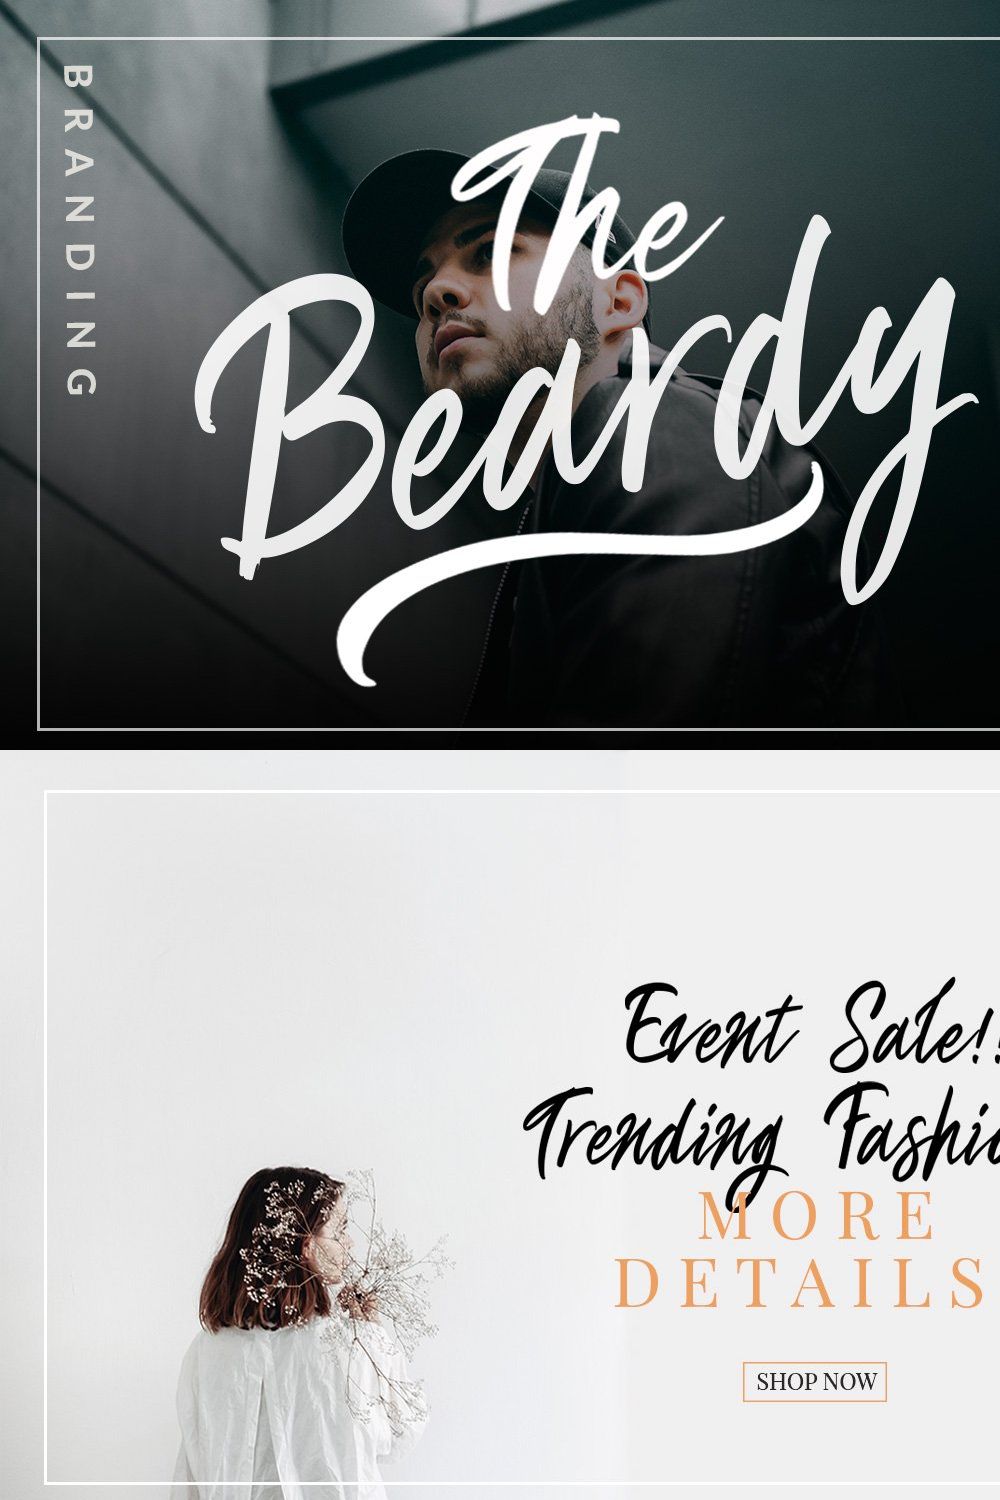 The Beardy Script pinterest preview image.